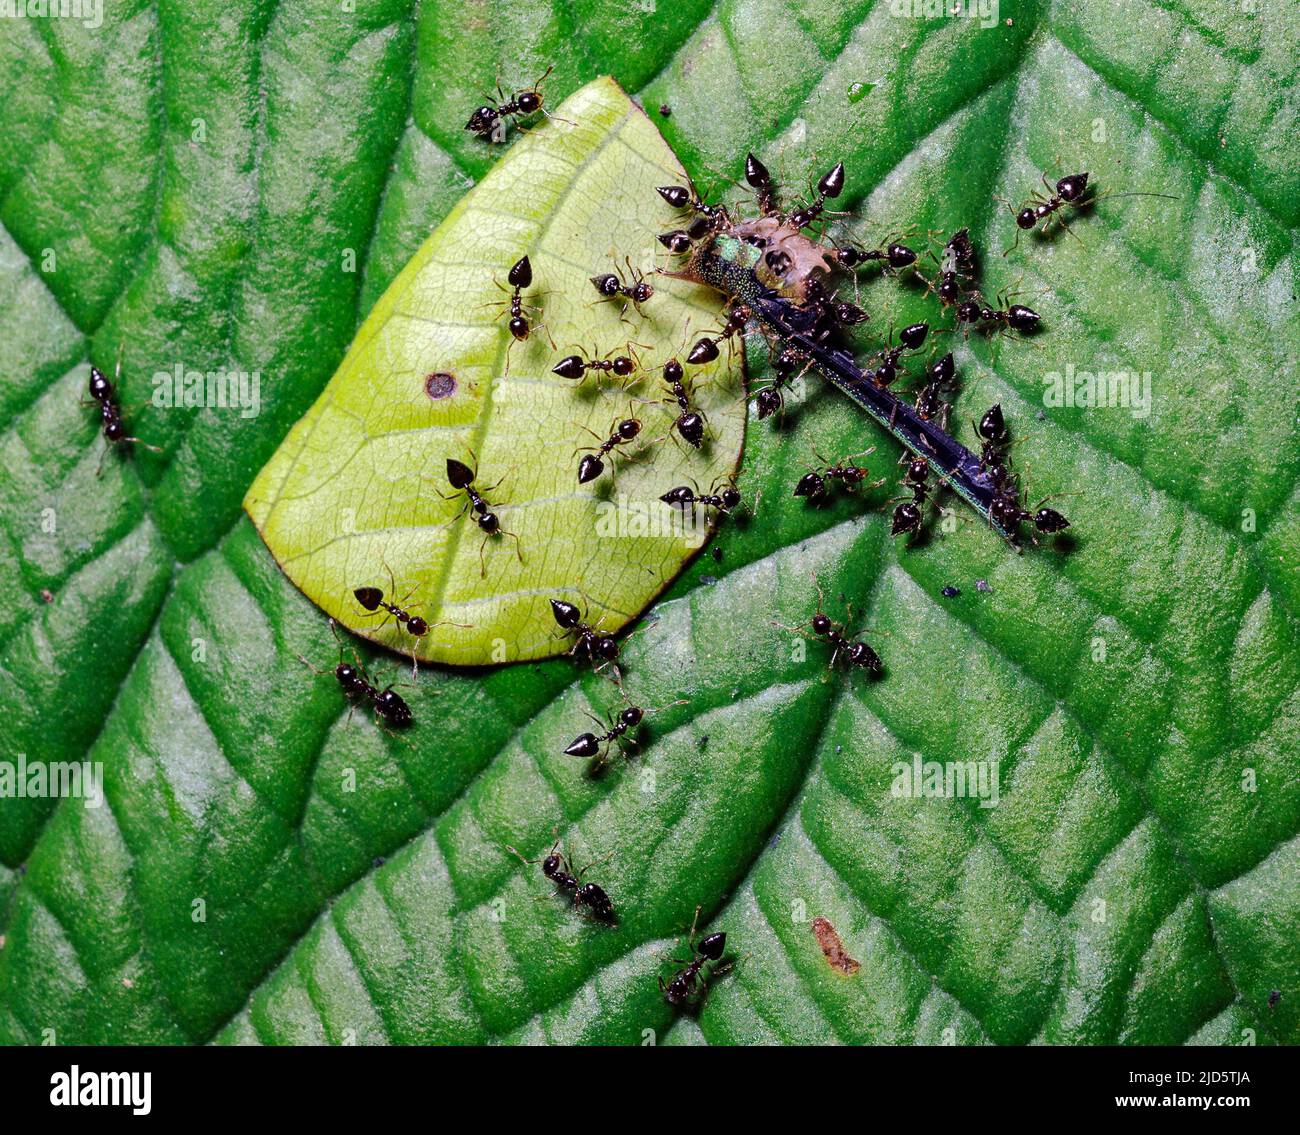 Saint Valentine ants (Chromogaster sp.) have attacked and killed a damselfly in the rainforest at LaSelva, Ecuador. Stock Photo